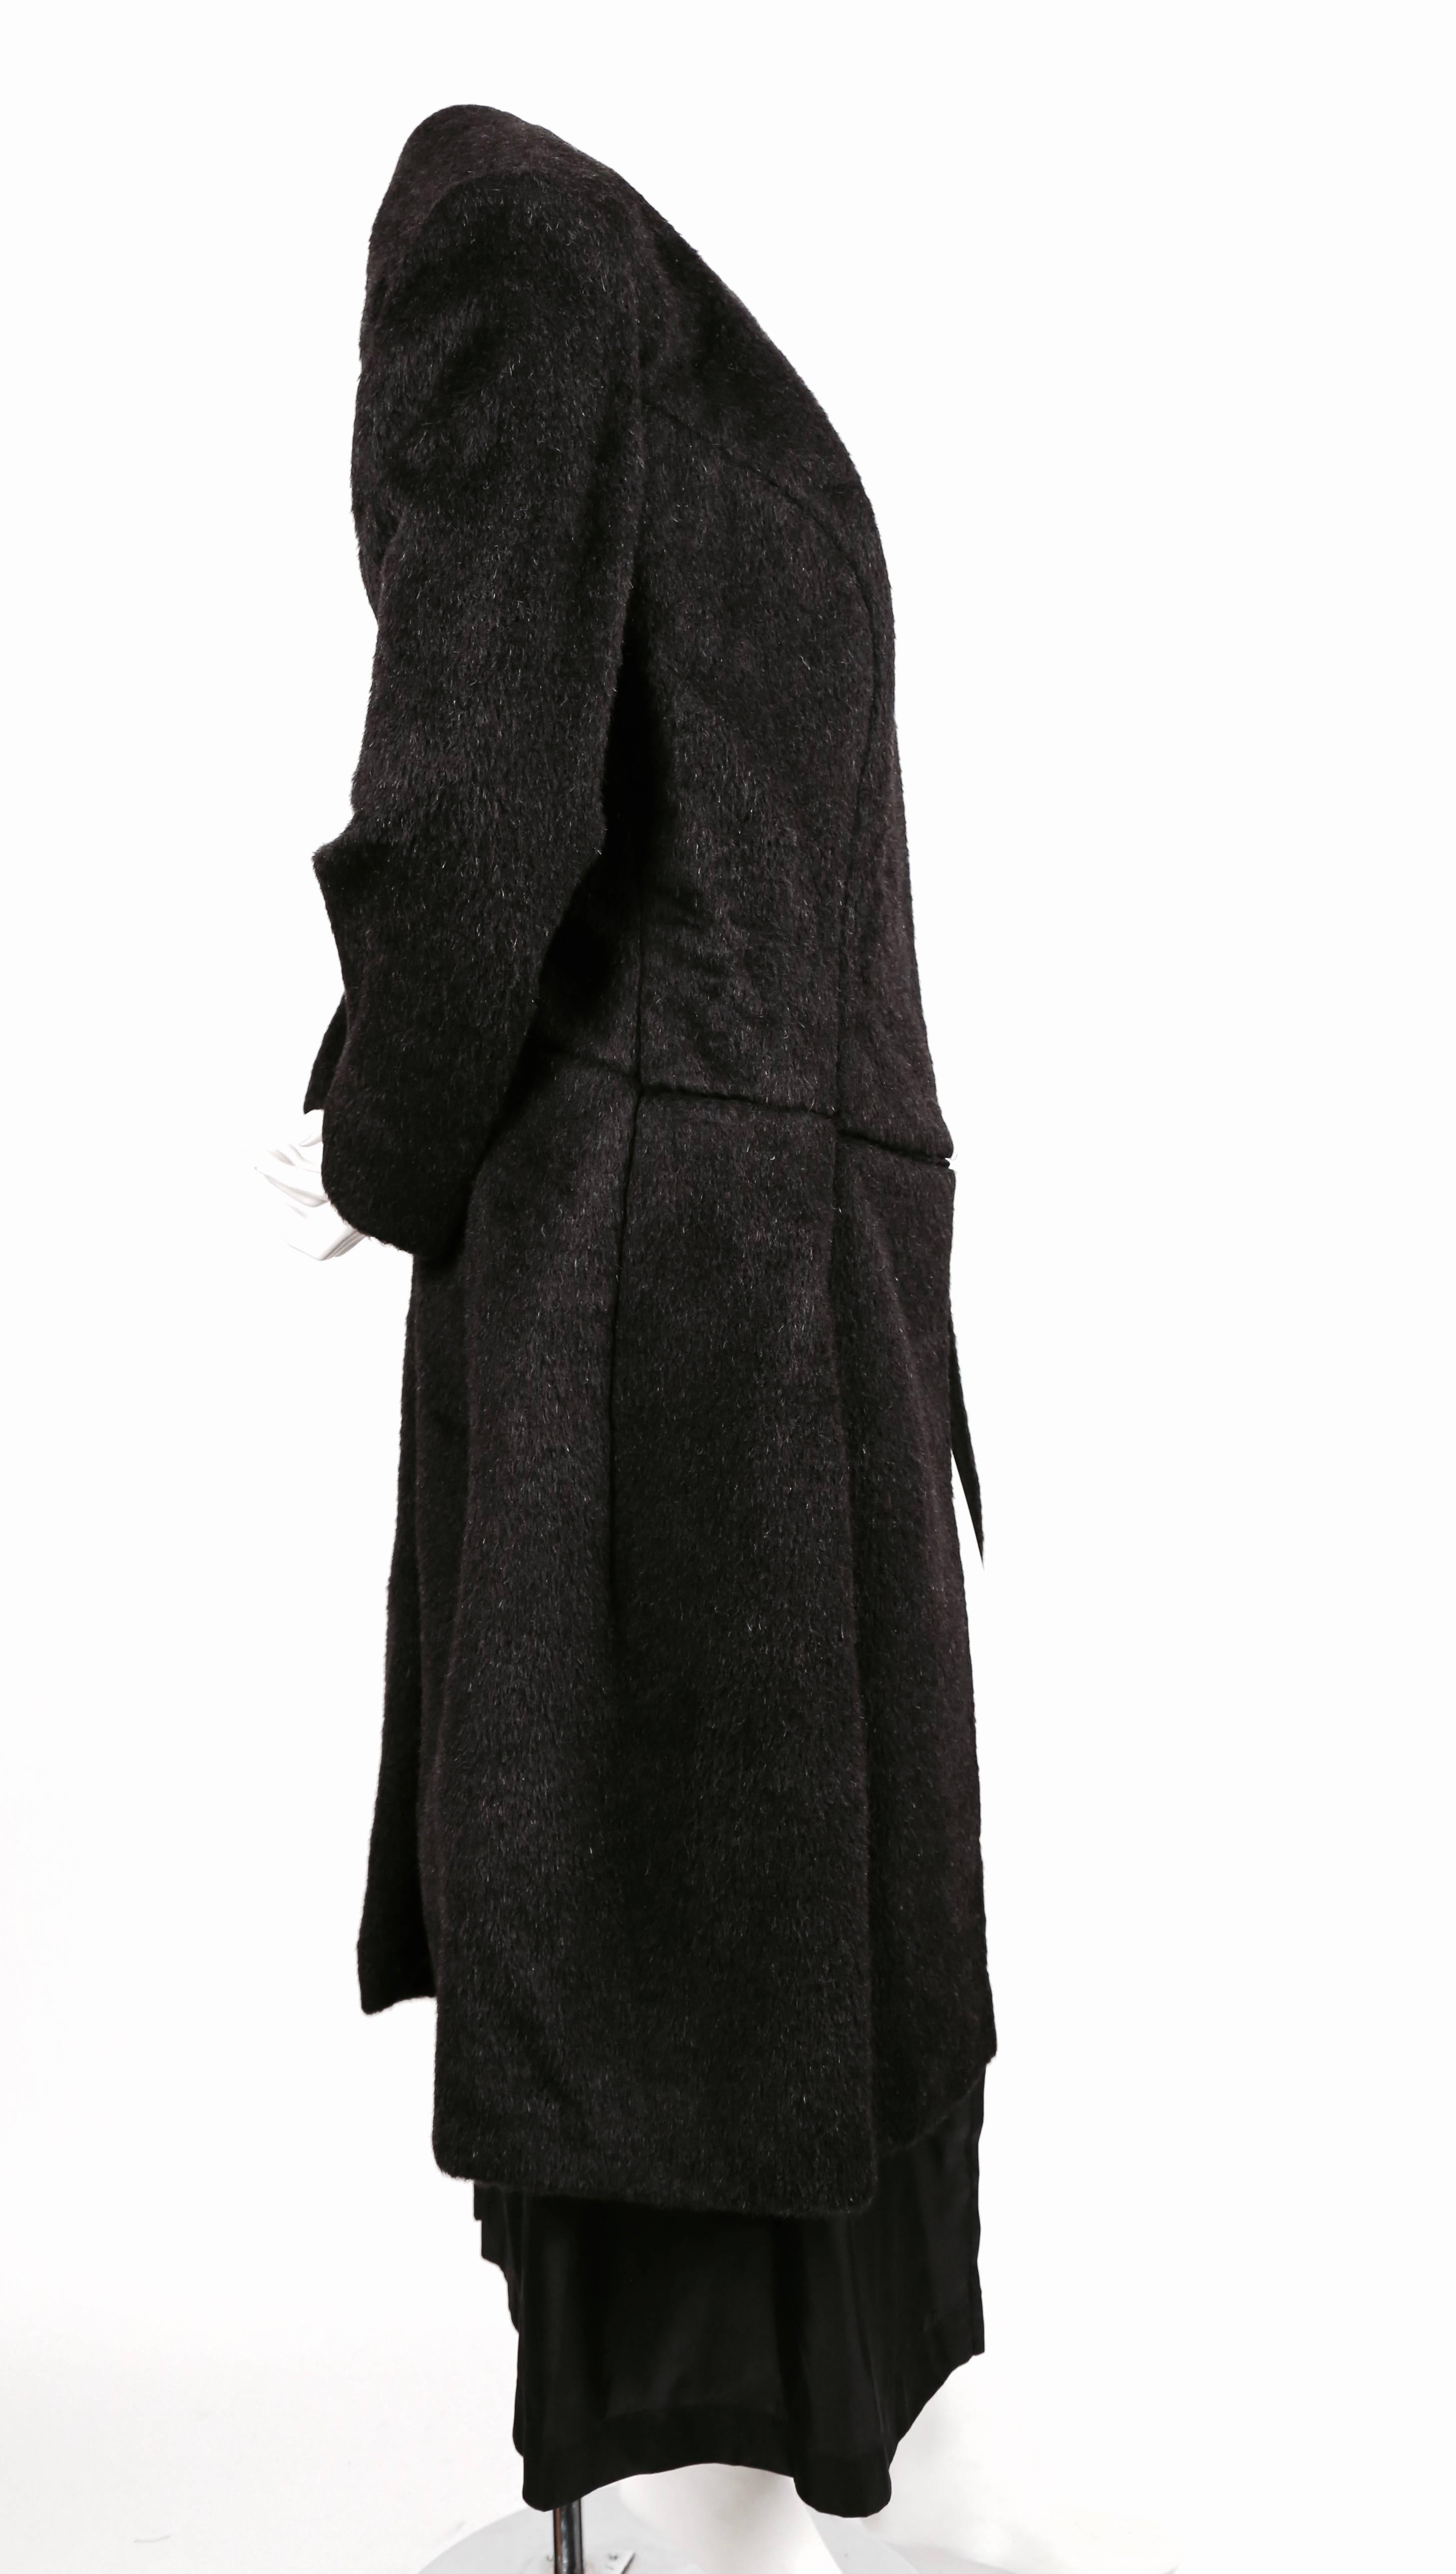 Charcoal grey alpaca hair coat by Comme Des Garcons exactly as seen on the runway for the 1997 Autumn/Winter collection. Size 'M' although this coat has a loose fit. Approximate measurements: shoulder 17